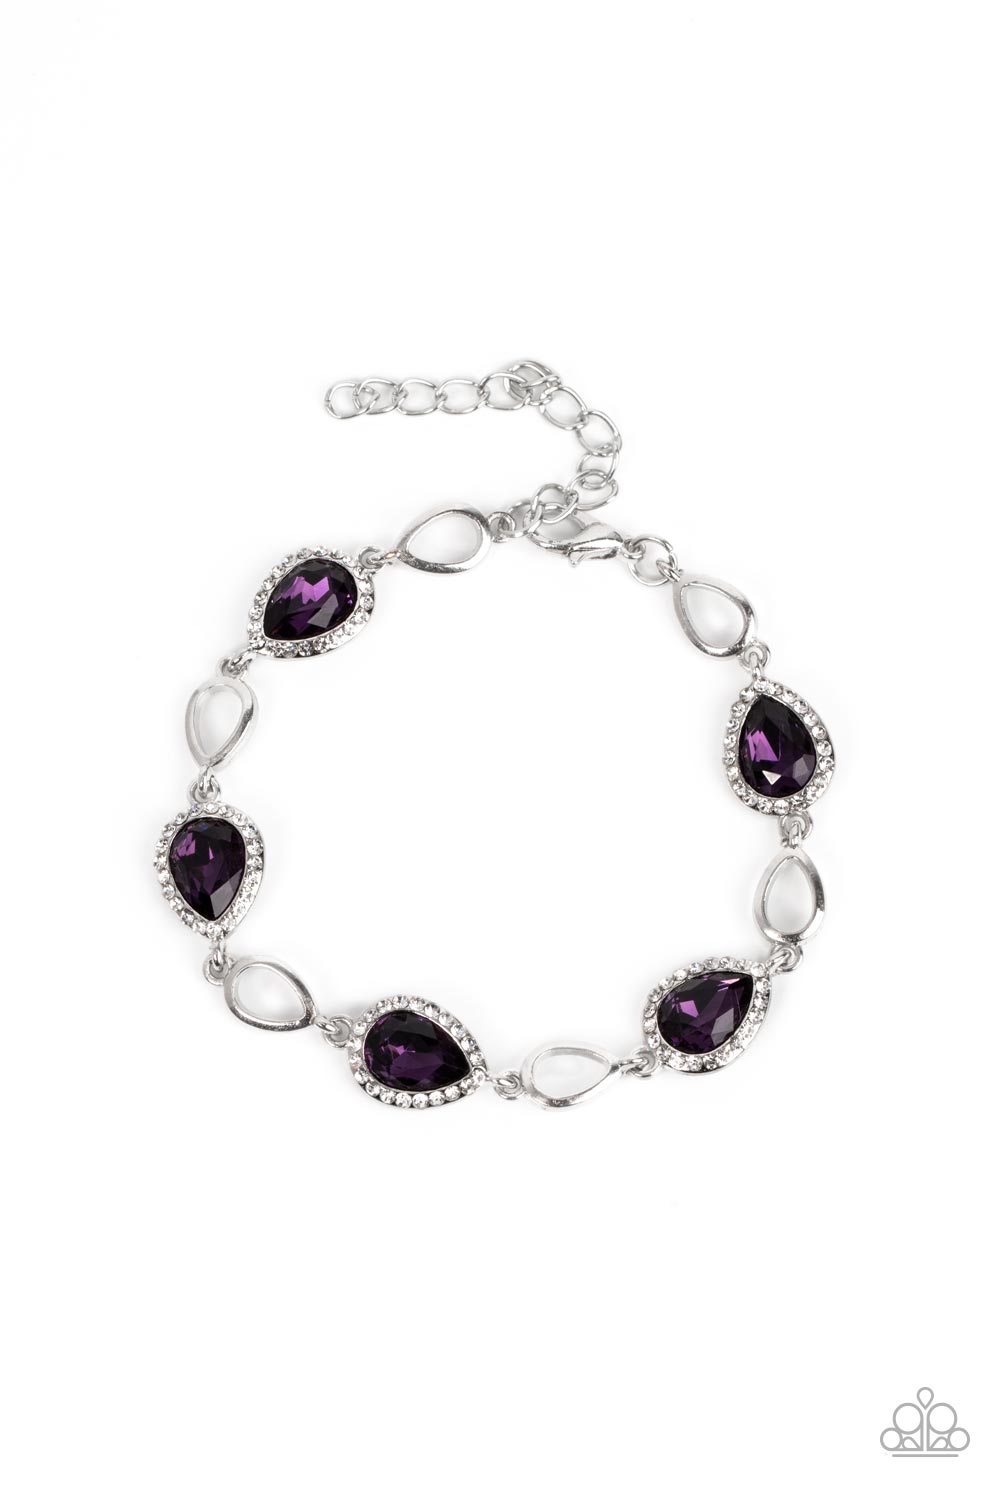 Timelessly Teary - Purple and Silver Bracelet - Paparazzi Accessories - Bordered in glassy white rhinestones, glittery purple teardrop gems link with airy silver teardrop frames around the wrist for a timeless twinkle. Features an adjustable clasp closure. Sold as one individual bracelet.